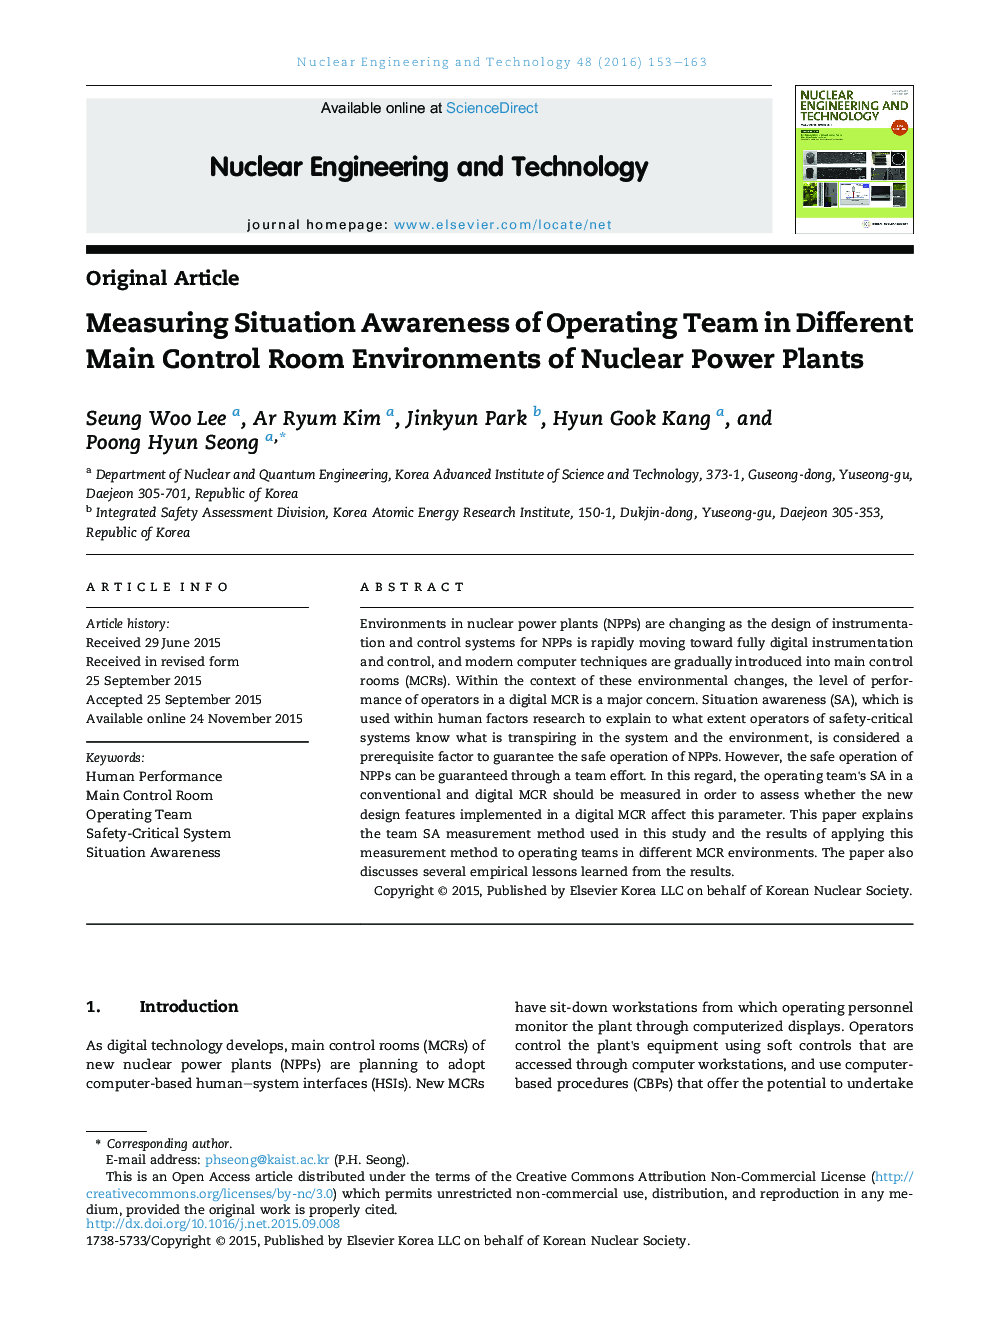 Measuring Situation Awareness of Operating Team in Different Main Control Room Environments of Nuclear Power Plants